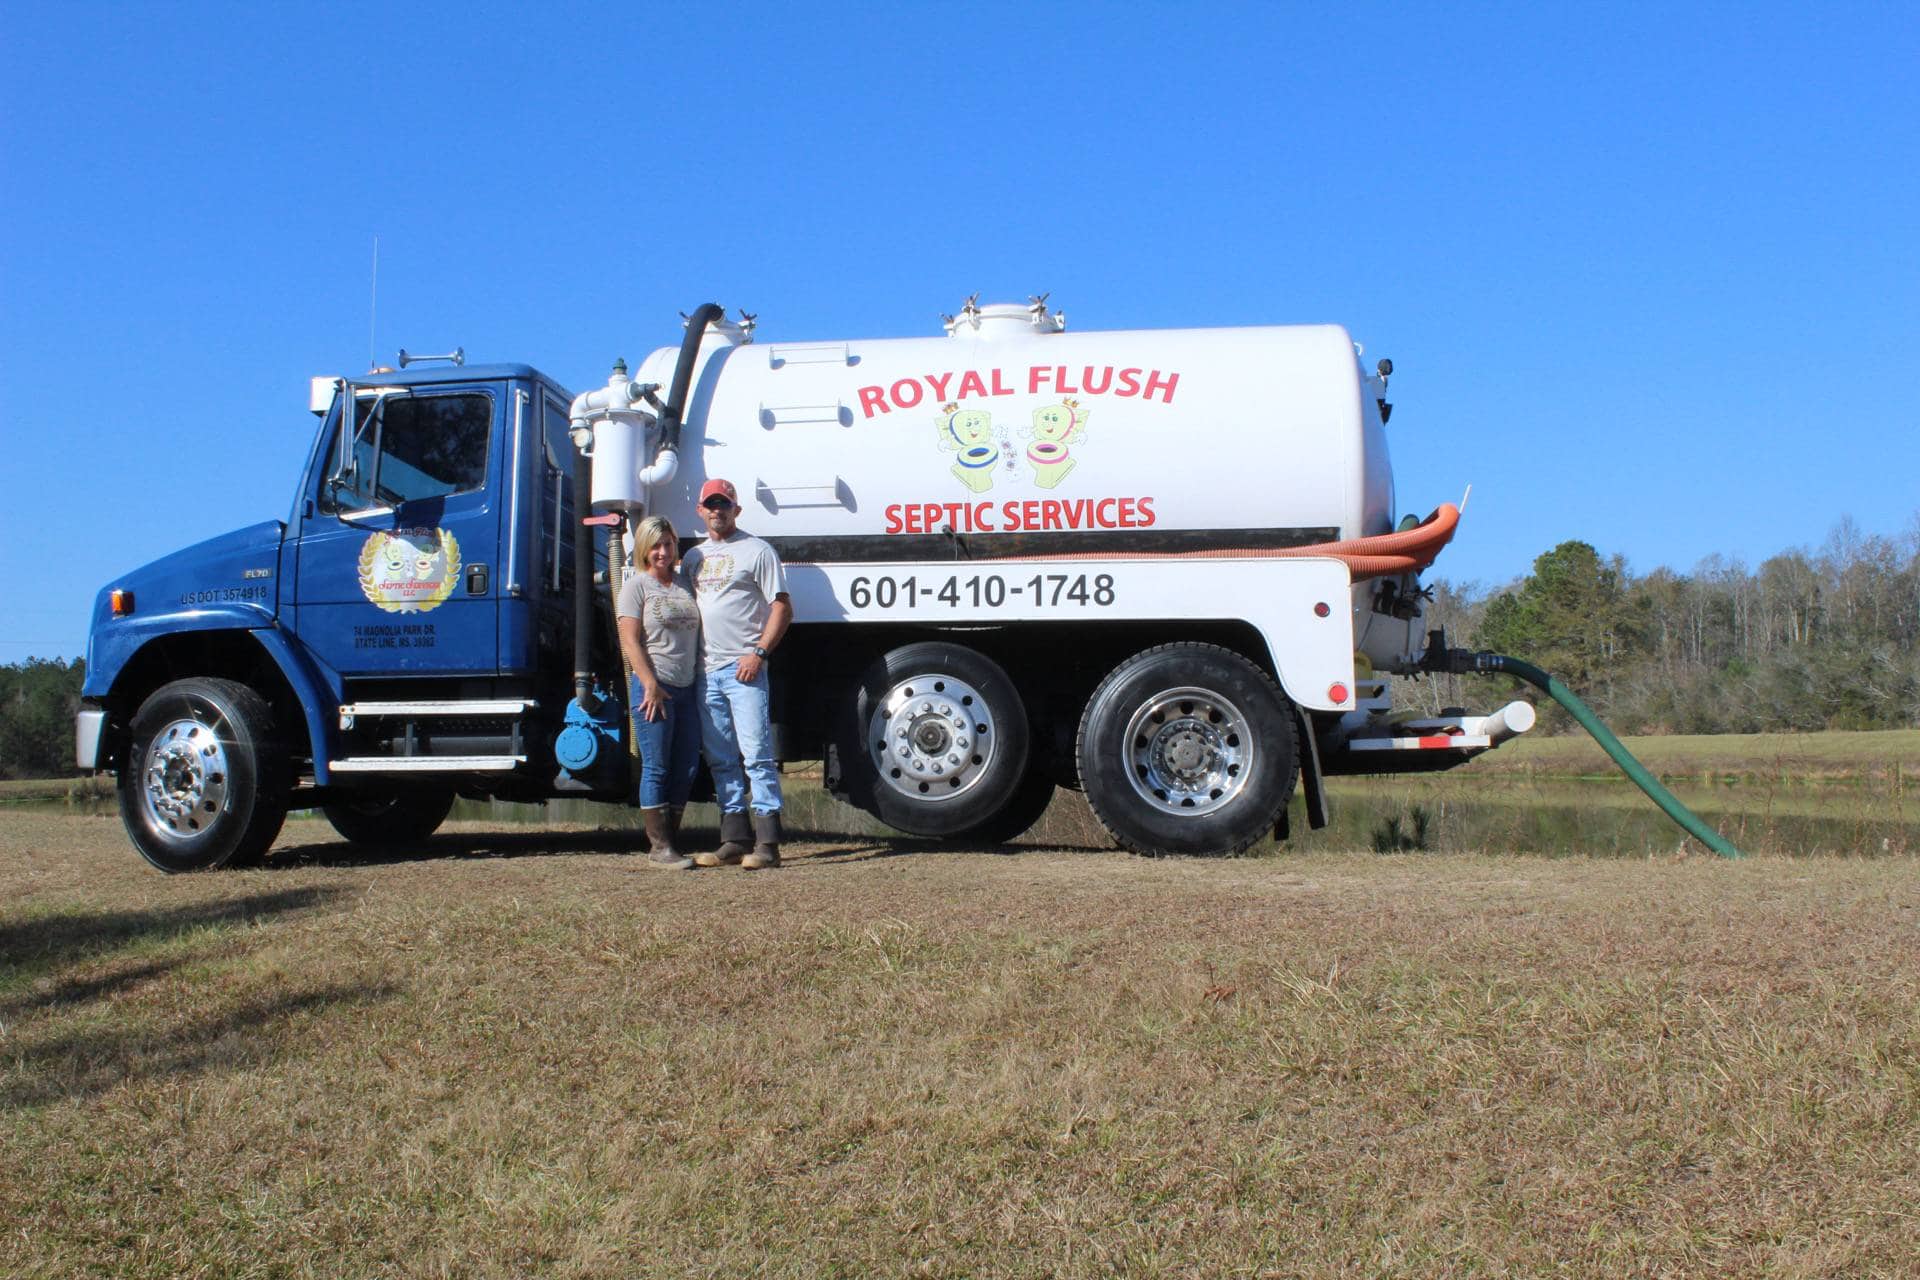 Royal Flush Septic Services LLC - State Line, MS, US, septic tank pumping